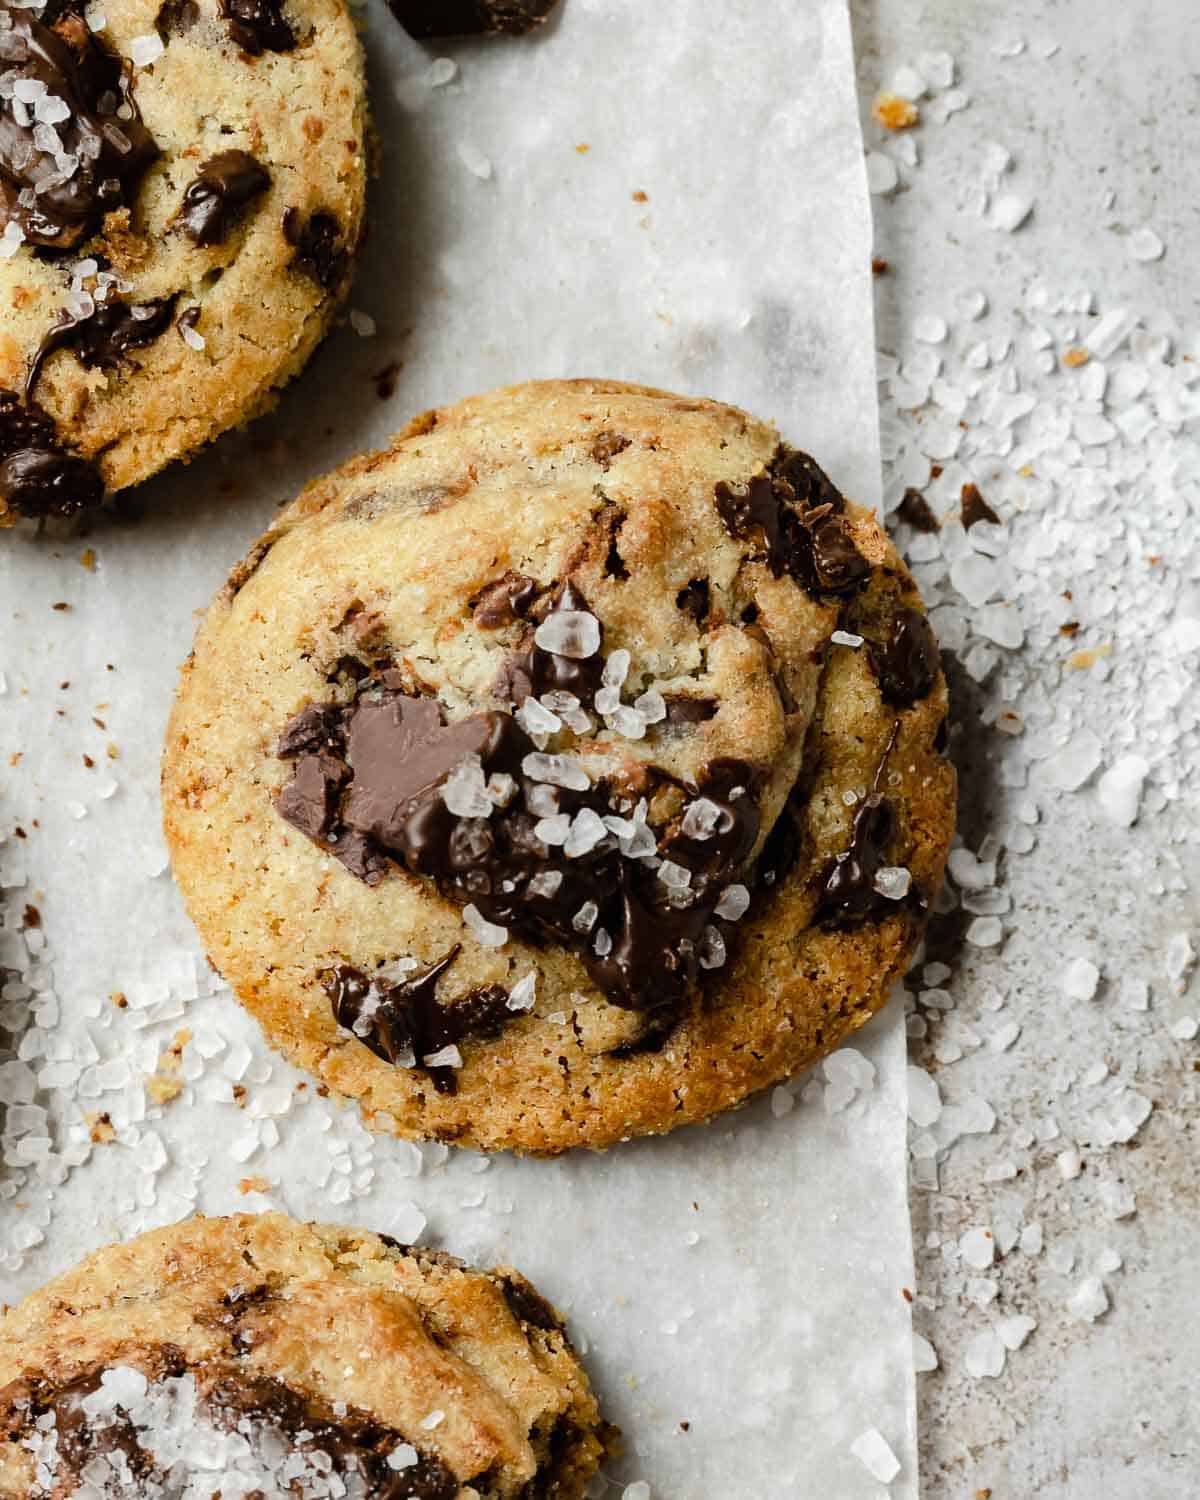 Three Chocolate Chip Cookies showing all the chocolate baked inside and topped with salt